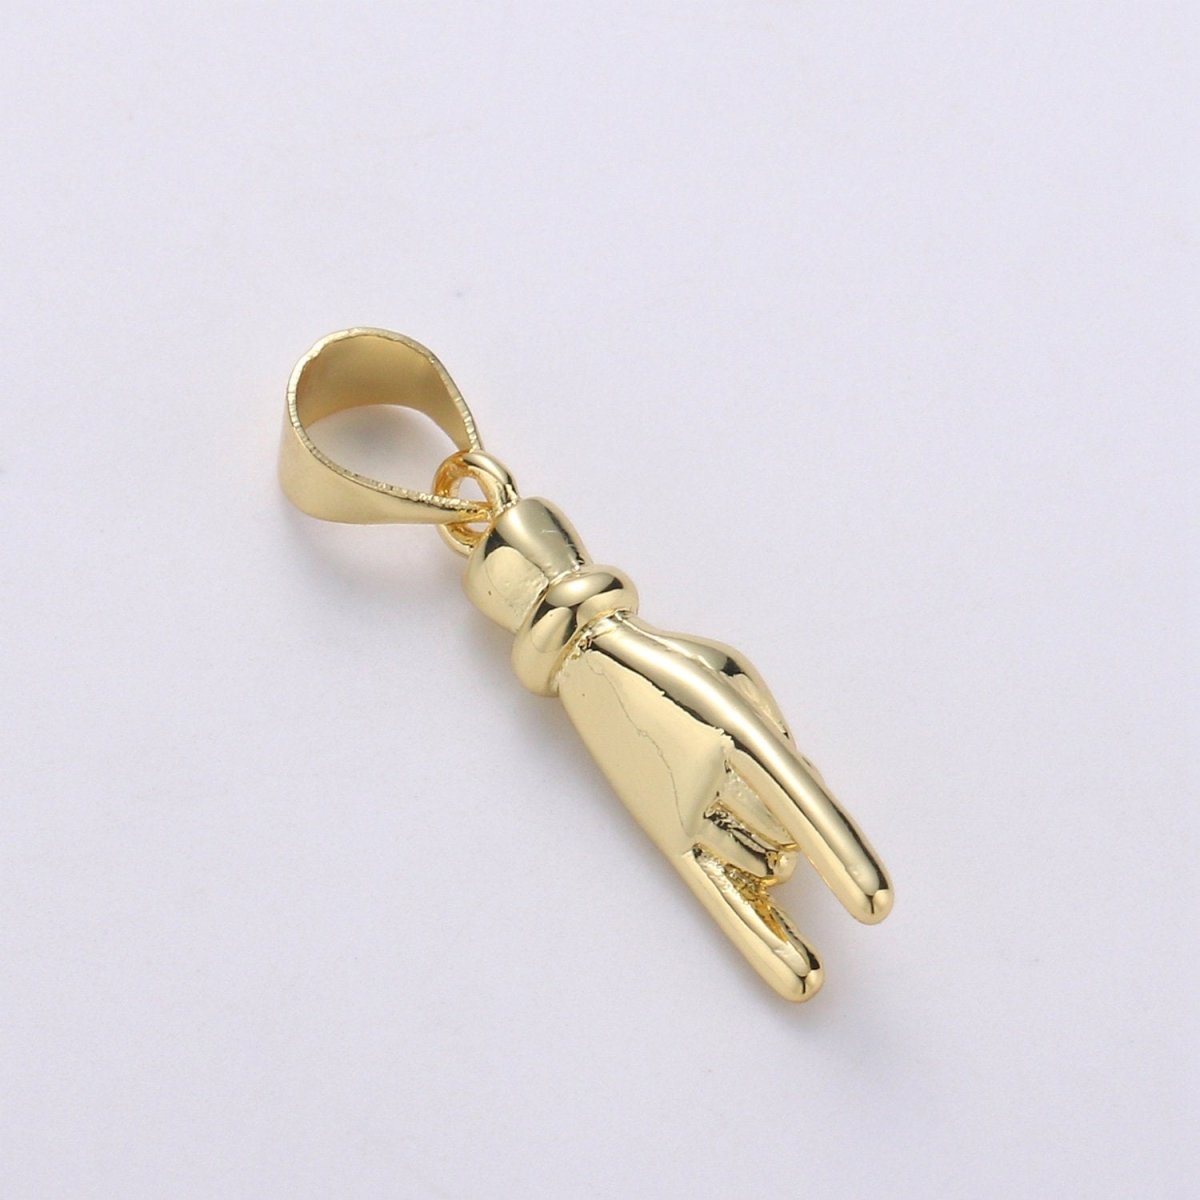 14K Gold Filled Hand Charm Mano Cornuto Good Luck Sign Pendant Hand Gesture Charm Pendant for Necklace Bracelet Earring Supply J-052 - DLUXCA